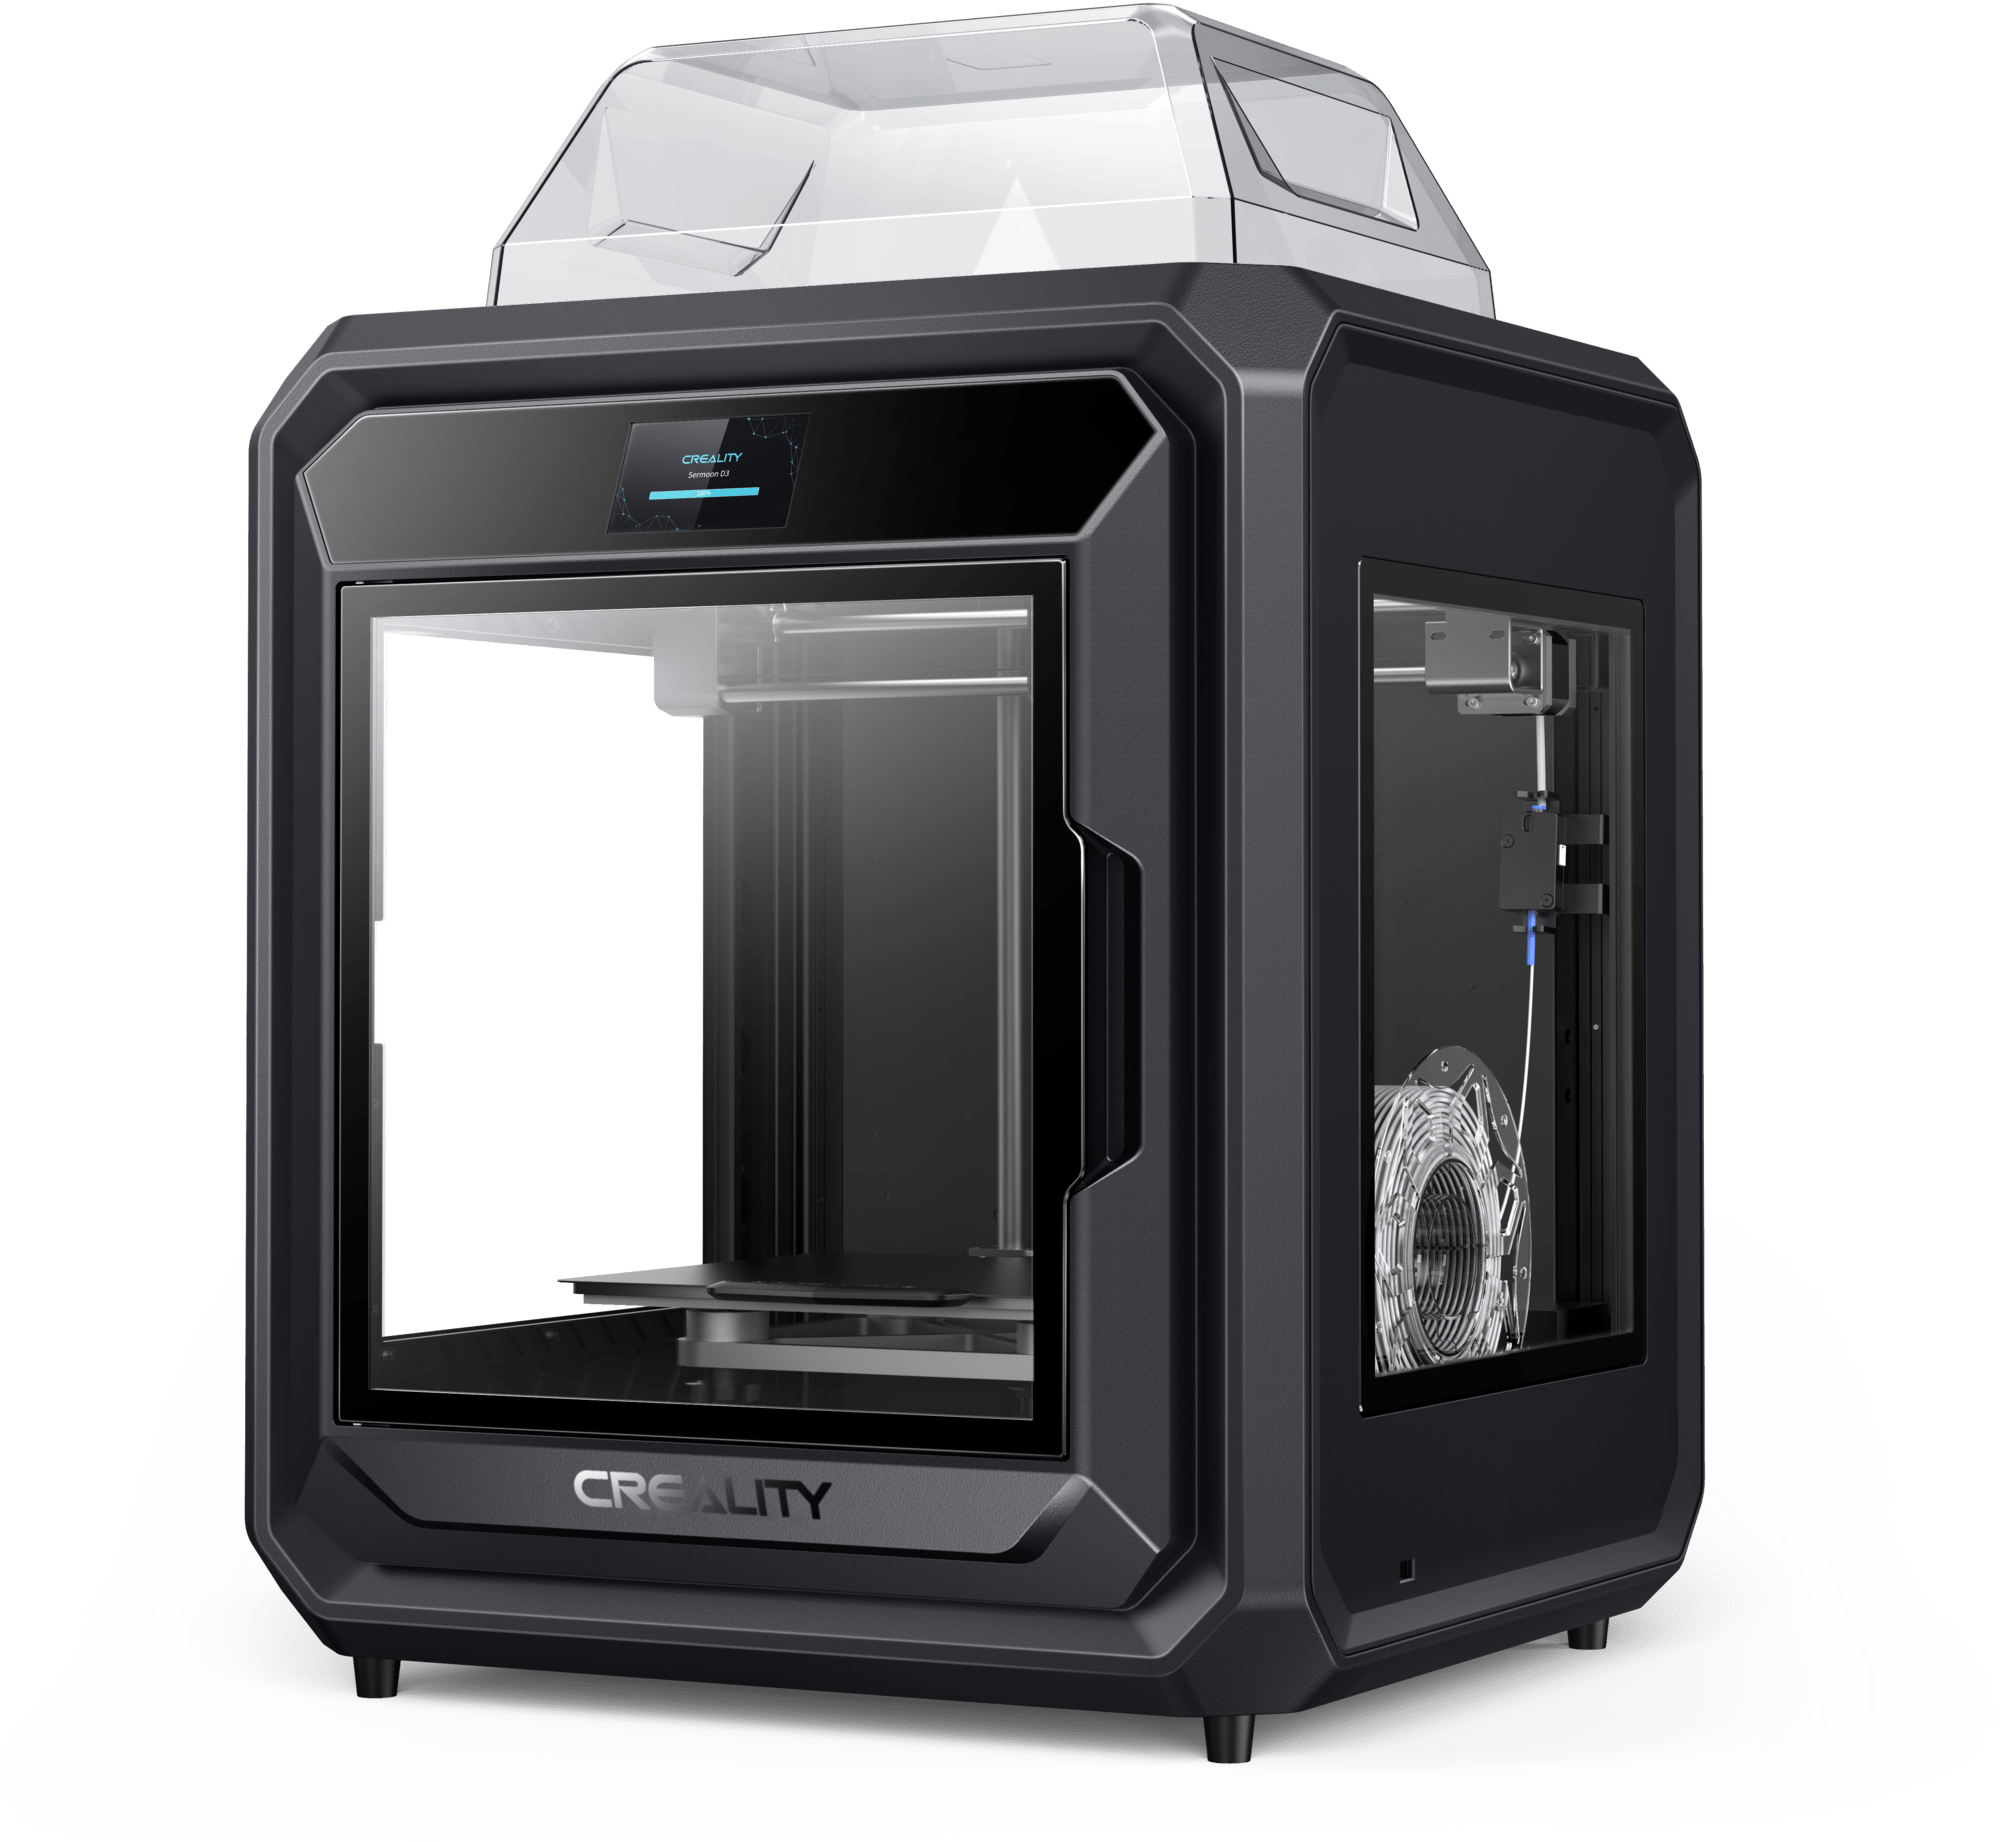 Preorder New Creality 3D Printer releases, Materials, Parts and